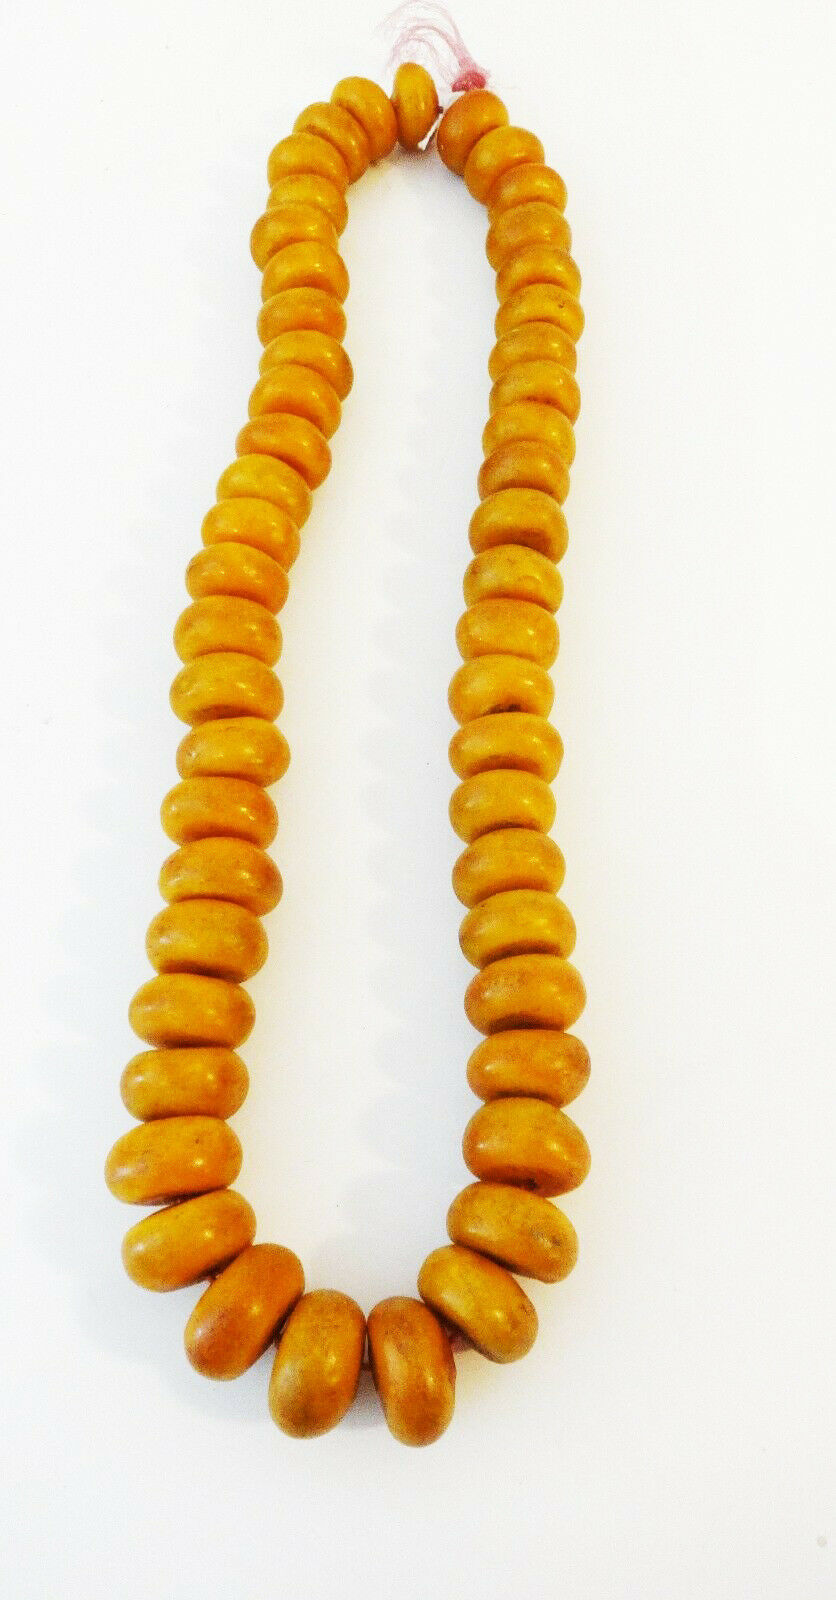 Superb Vintage African Simulated Amber Necklace w/50 trade beads